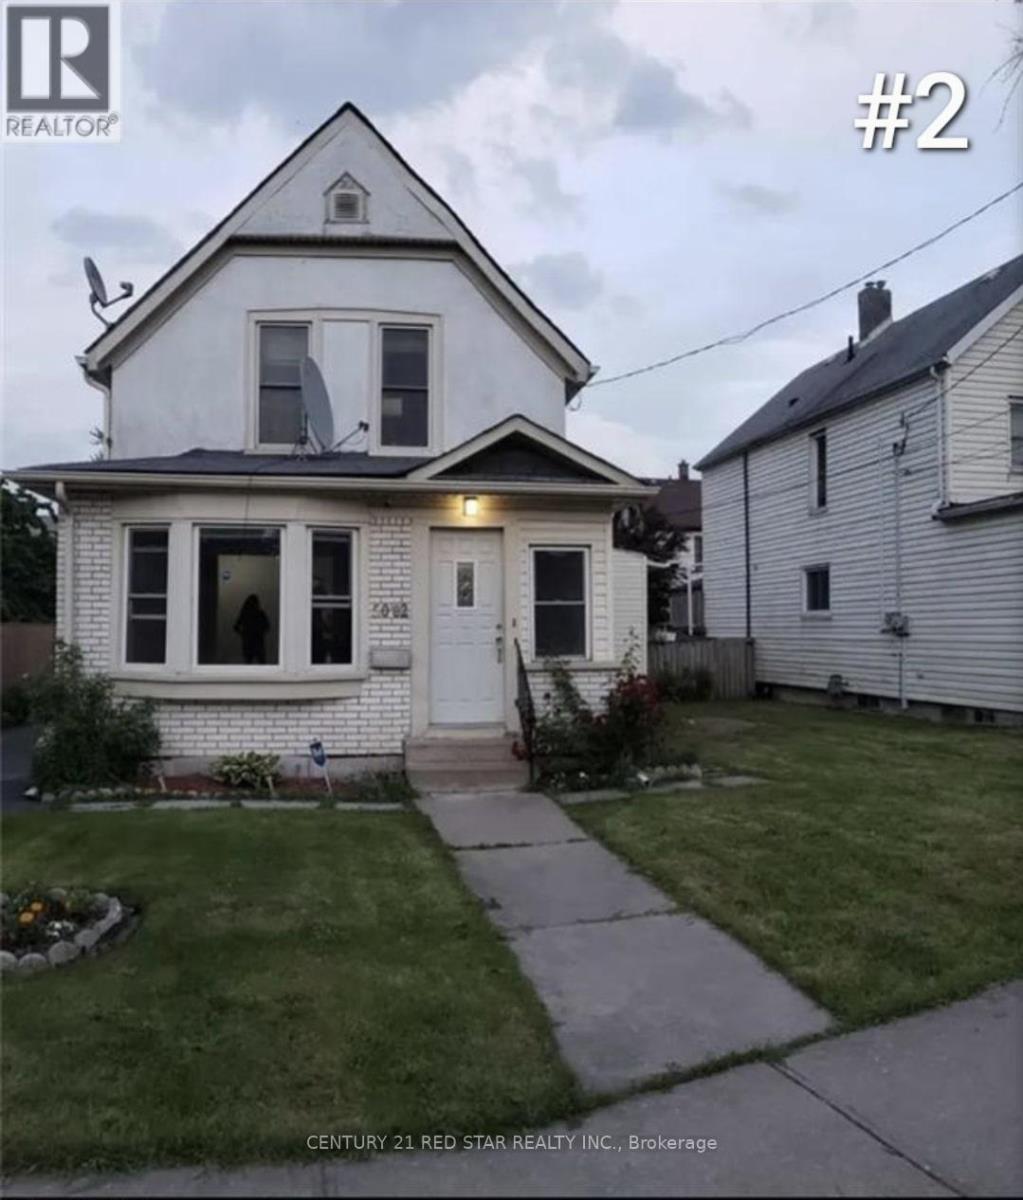 5082 St. Lawrence, Niagara Falls, 3 Bedrooms Bedrooms, ,2 BathroomsBathrooms,Single Family,For Sale,St. Lawrence,X8097580